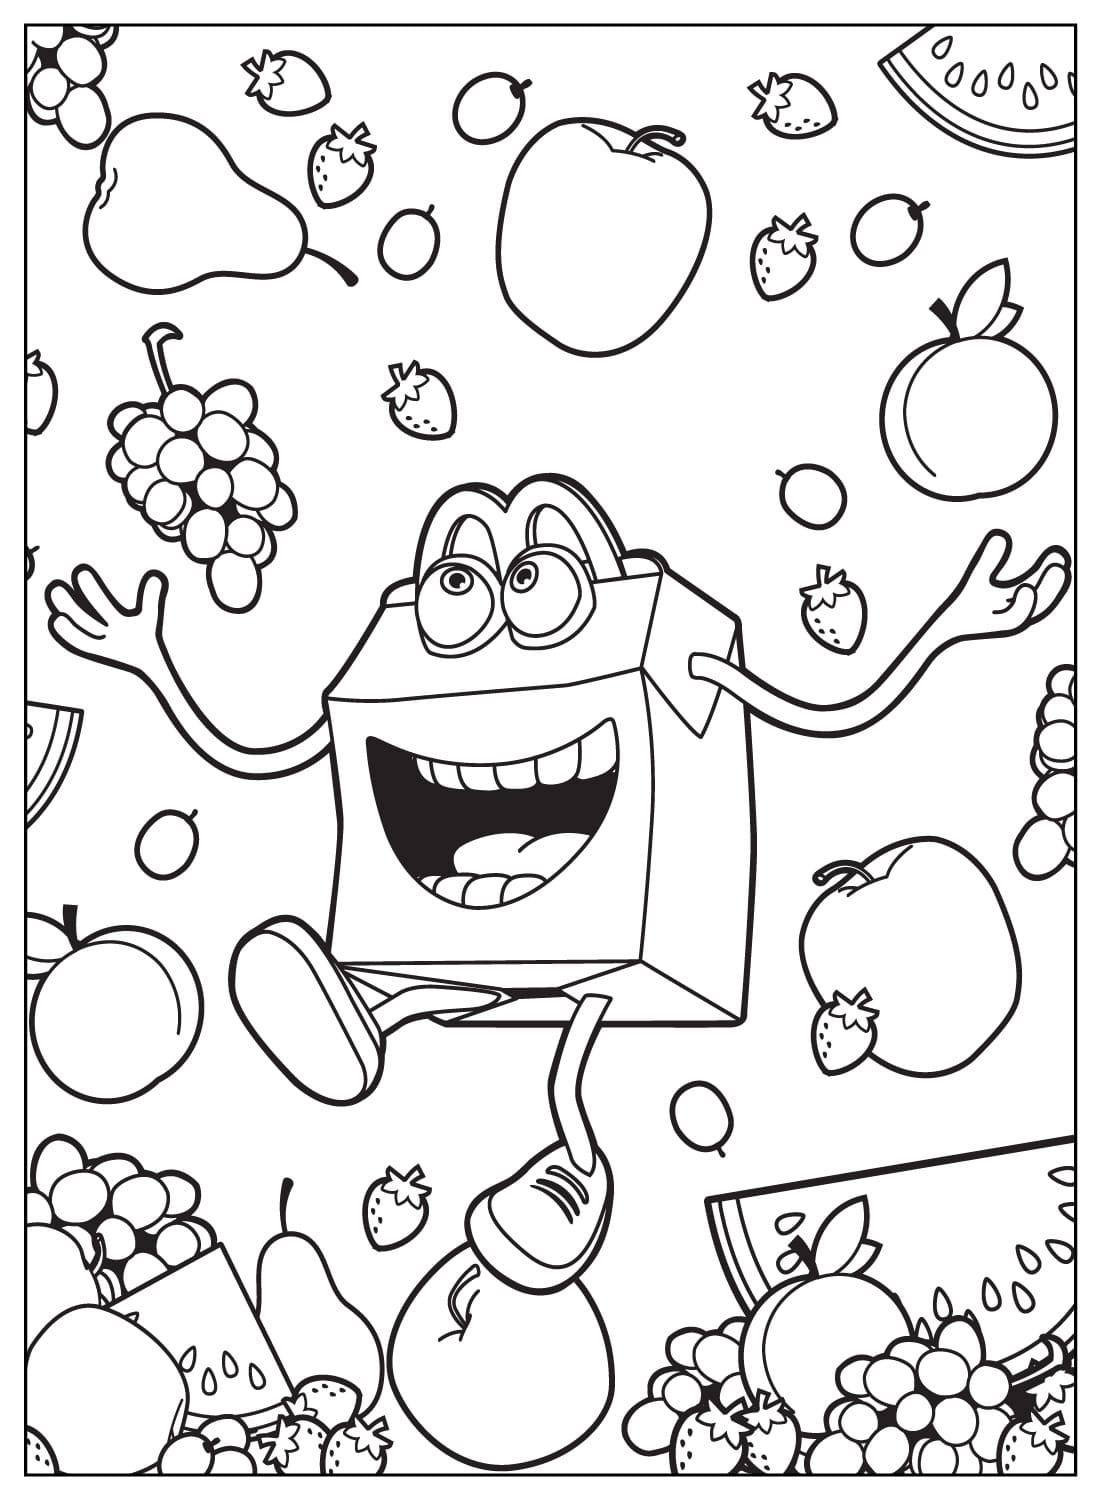 McDonalds Images to Color from McDonald's